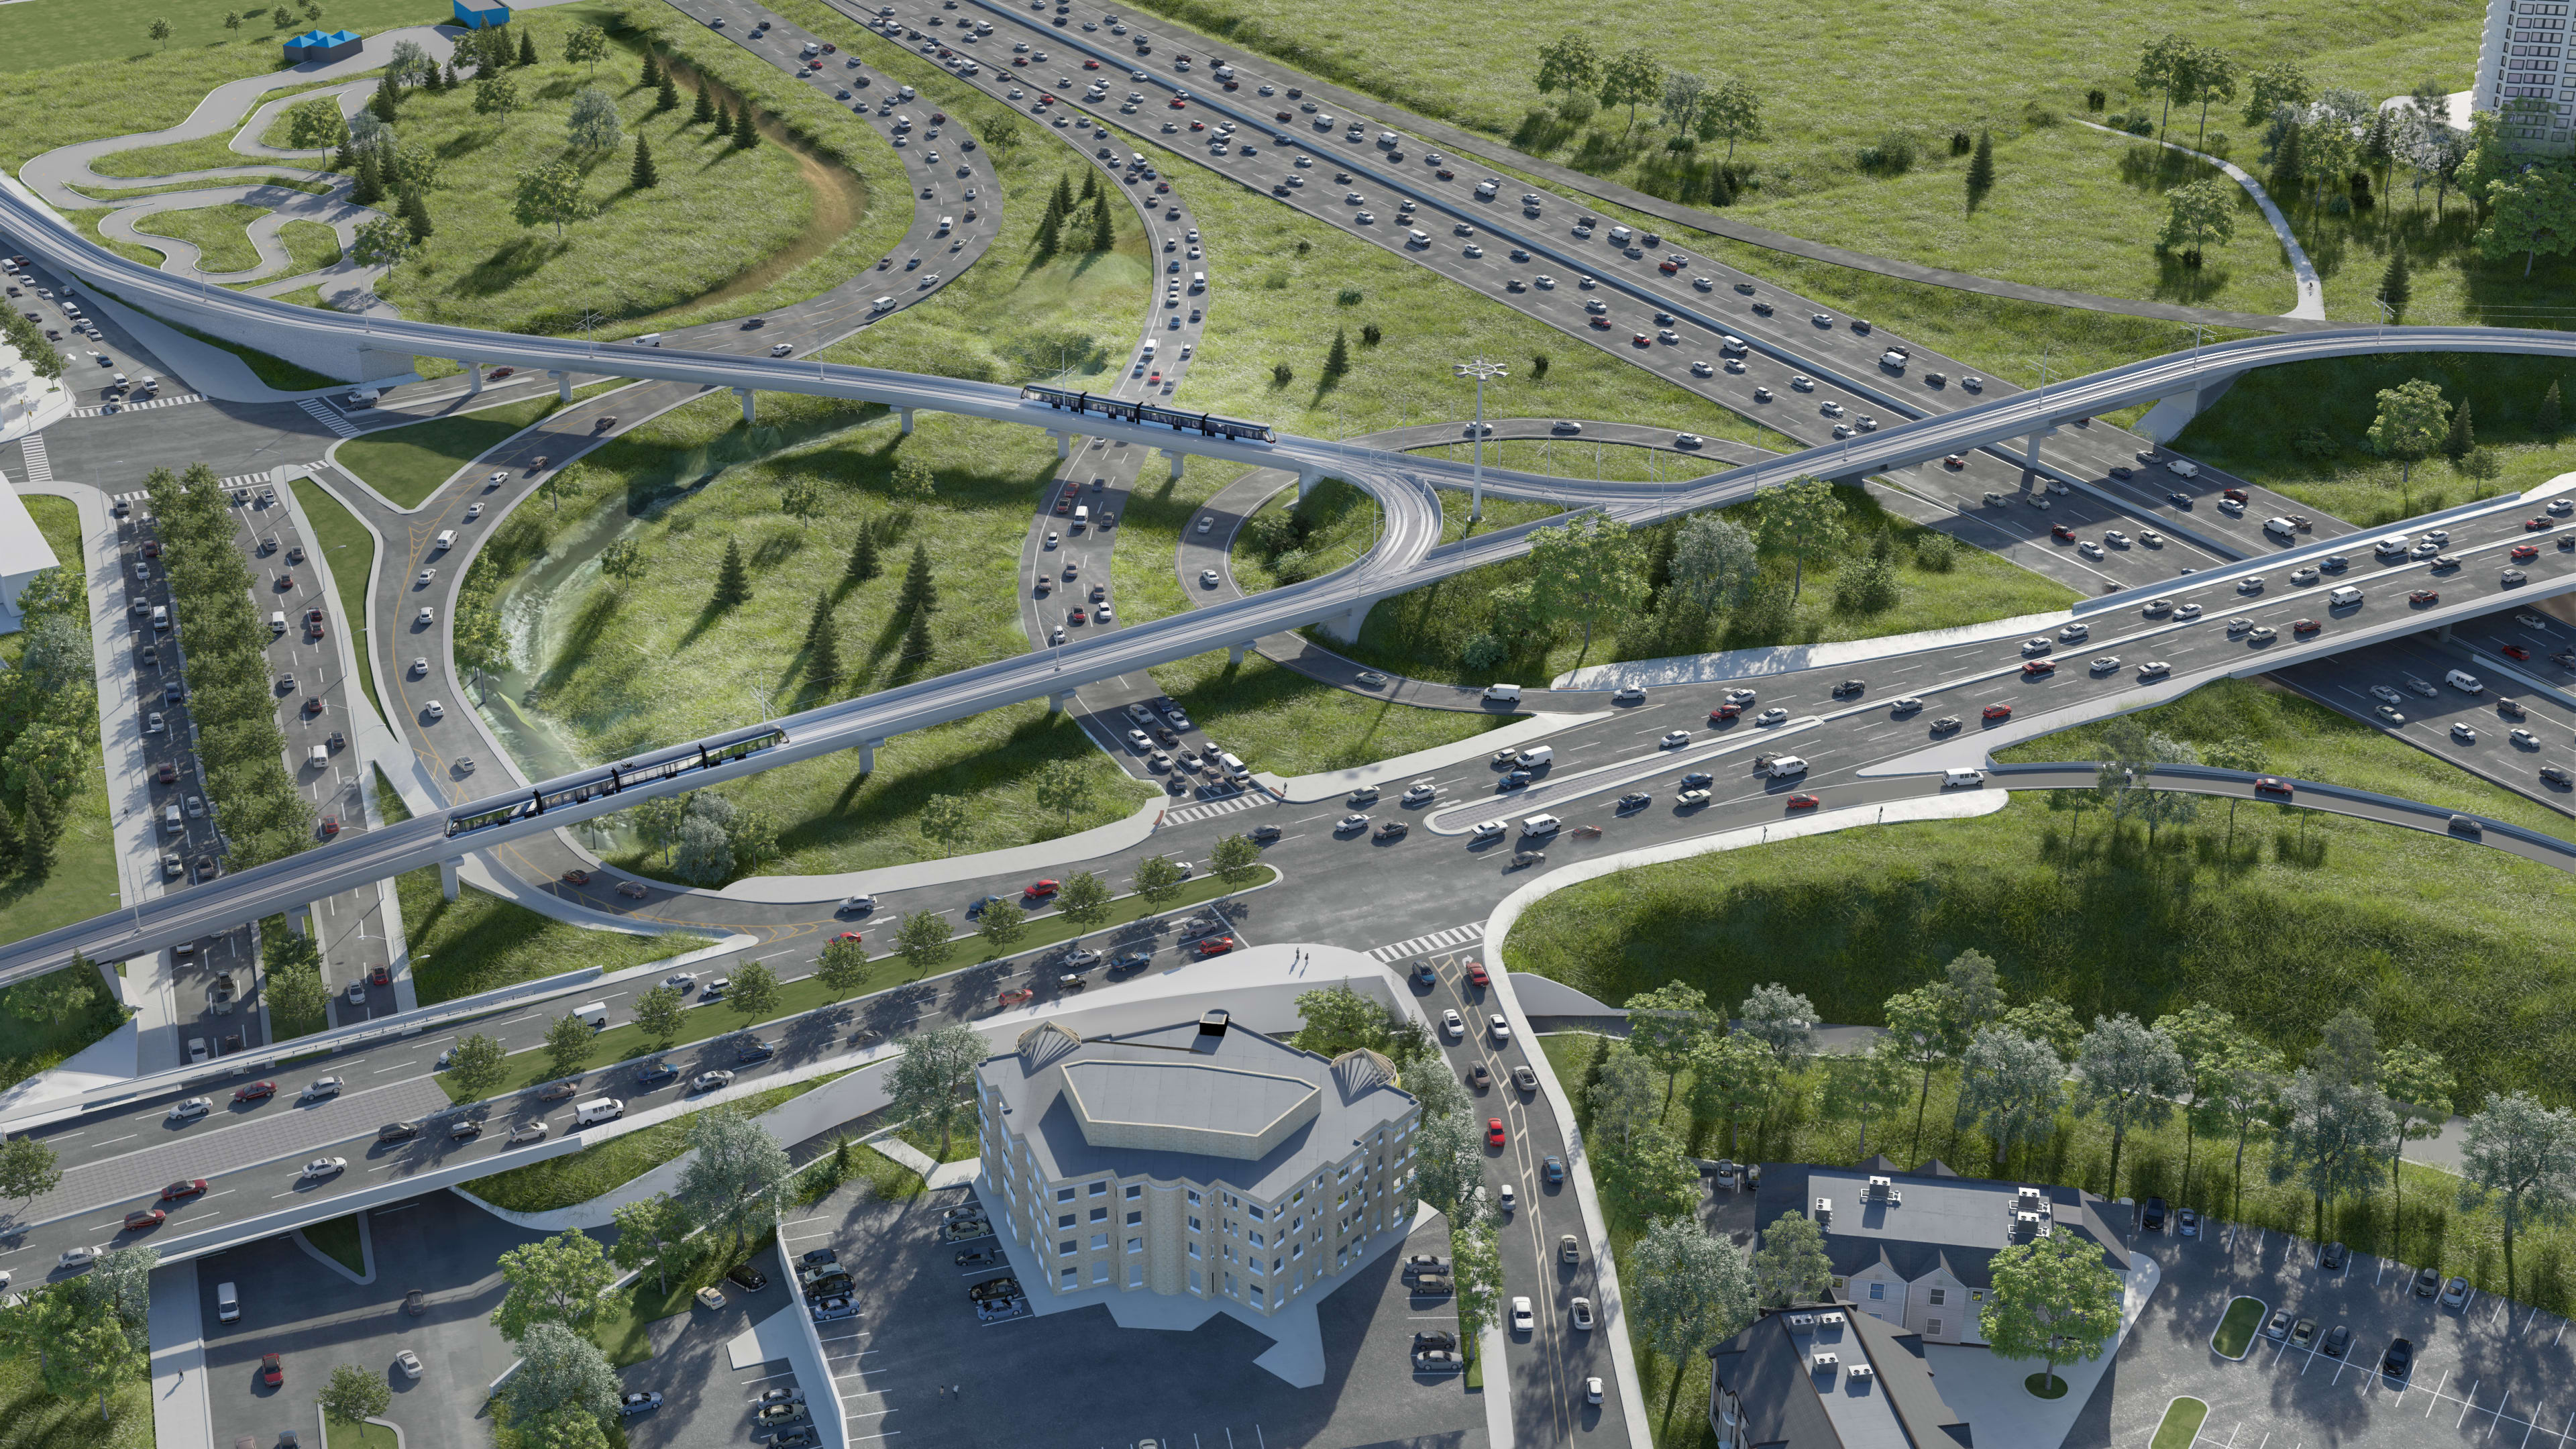 Rendering shows the LRT above a busy highway.